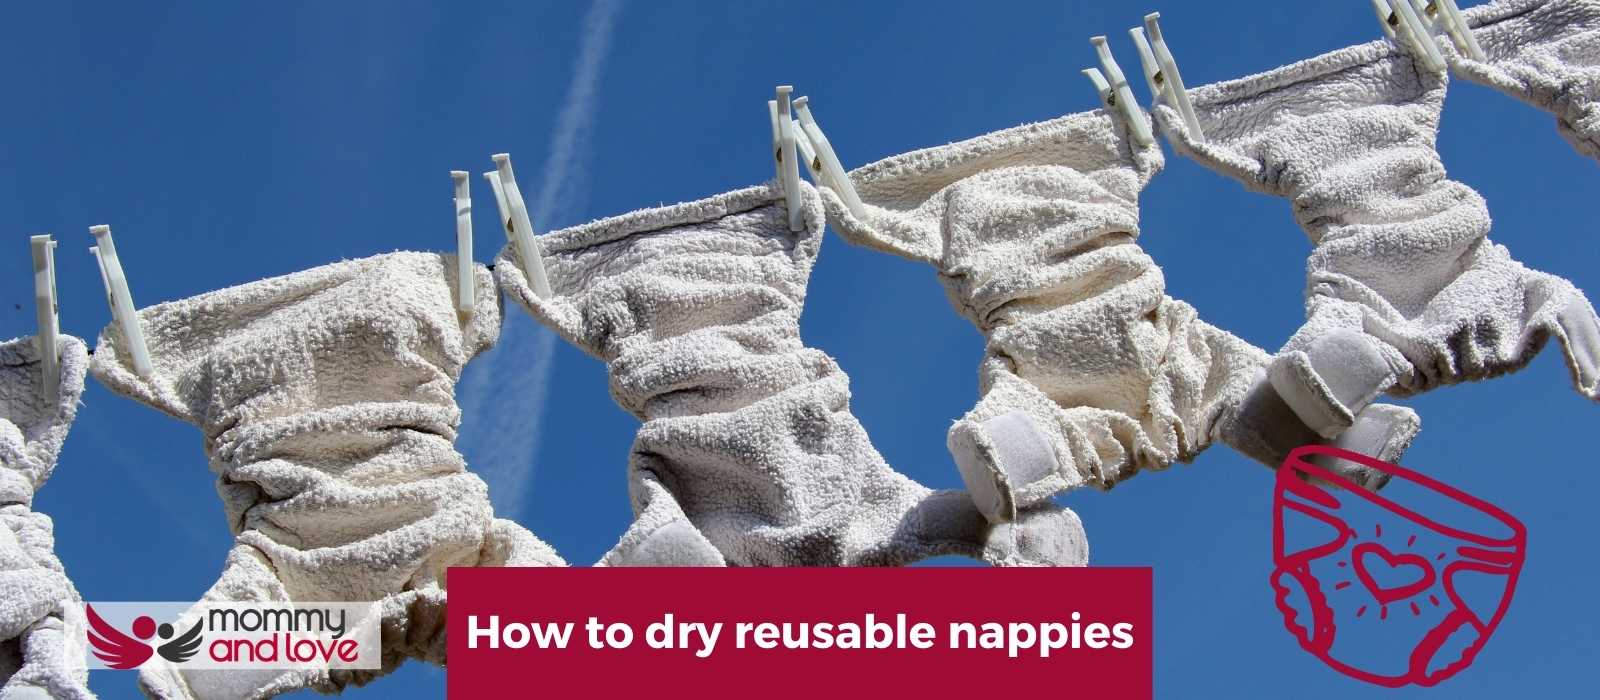 How to dry reusable nappies